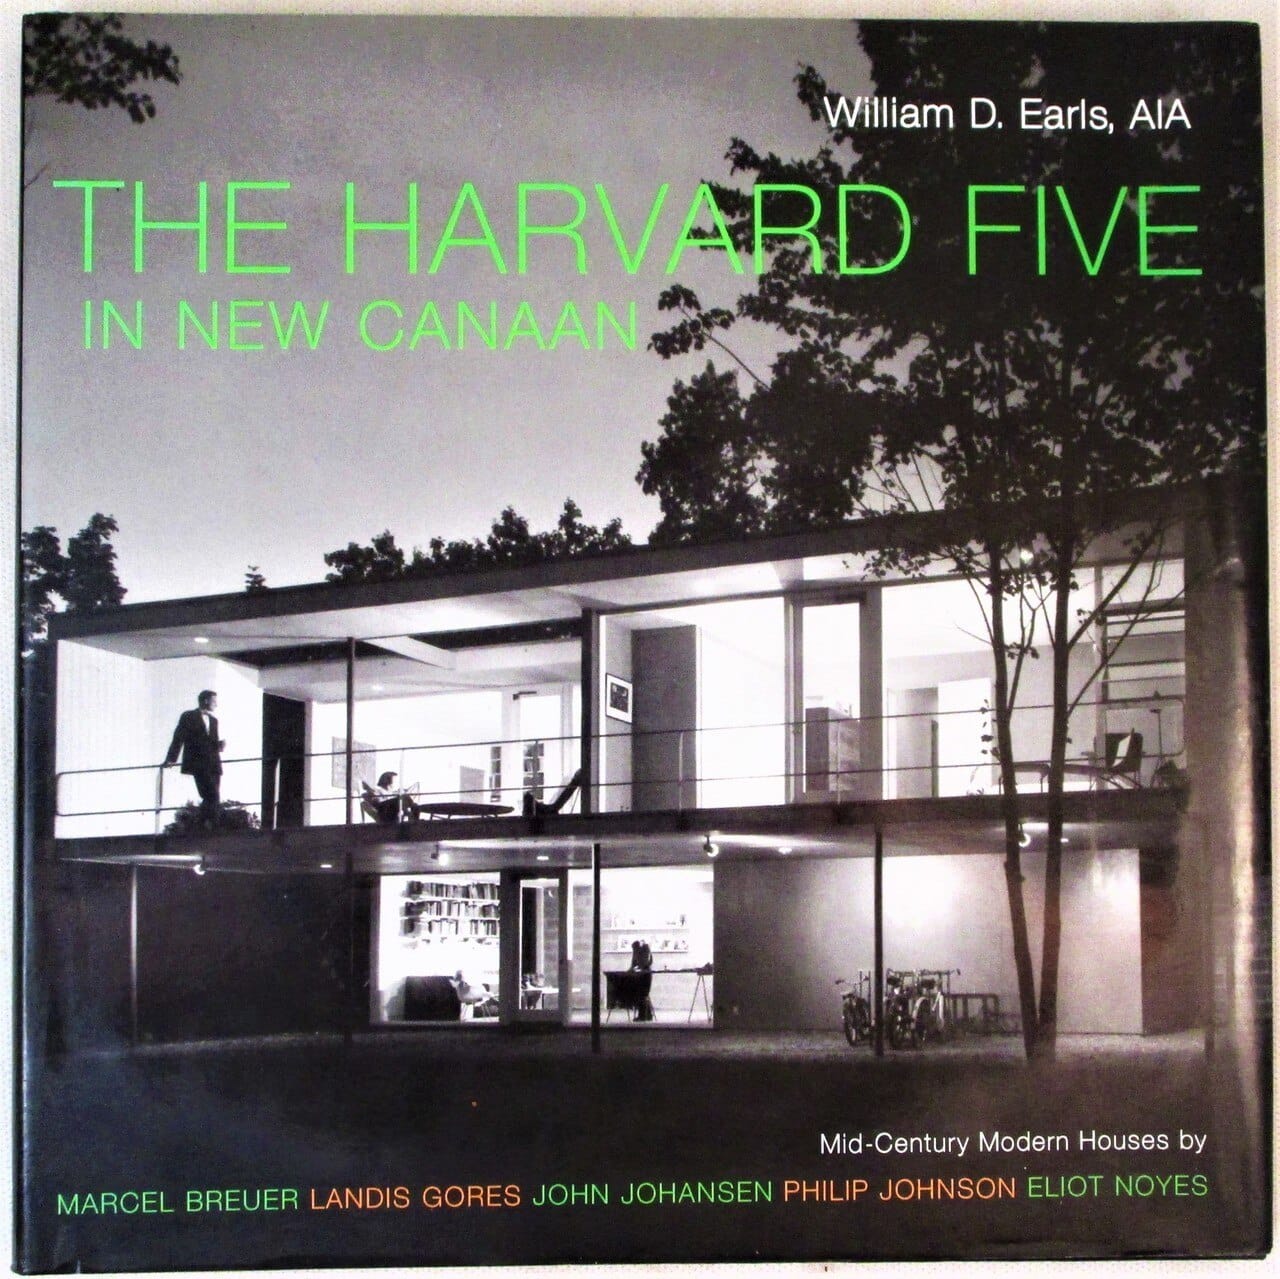 The Harvard Five book cover